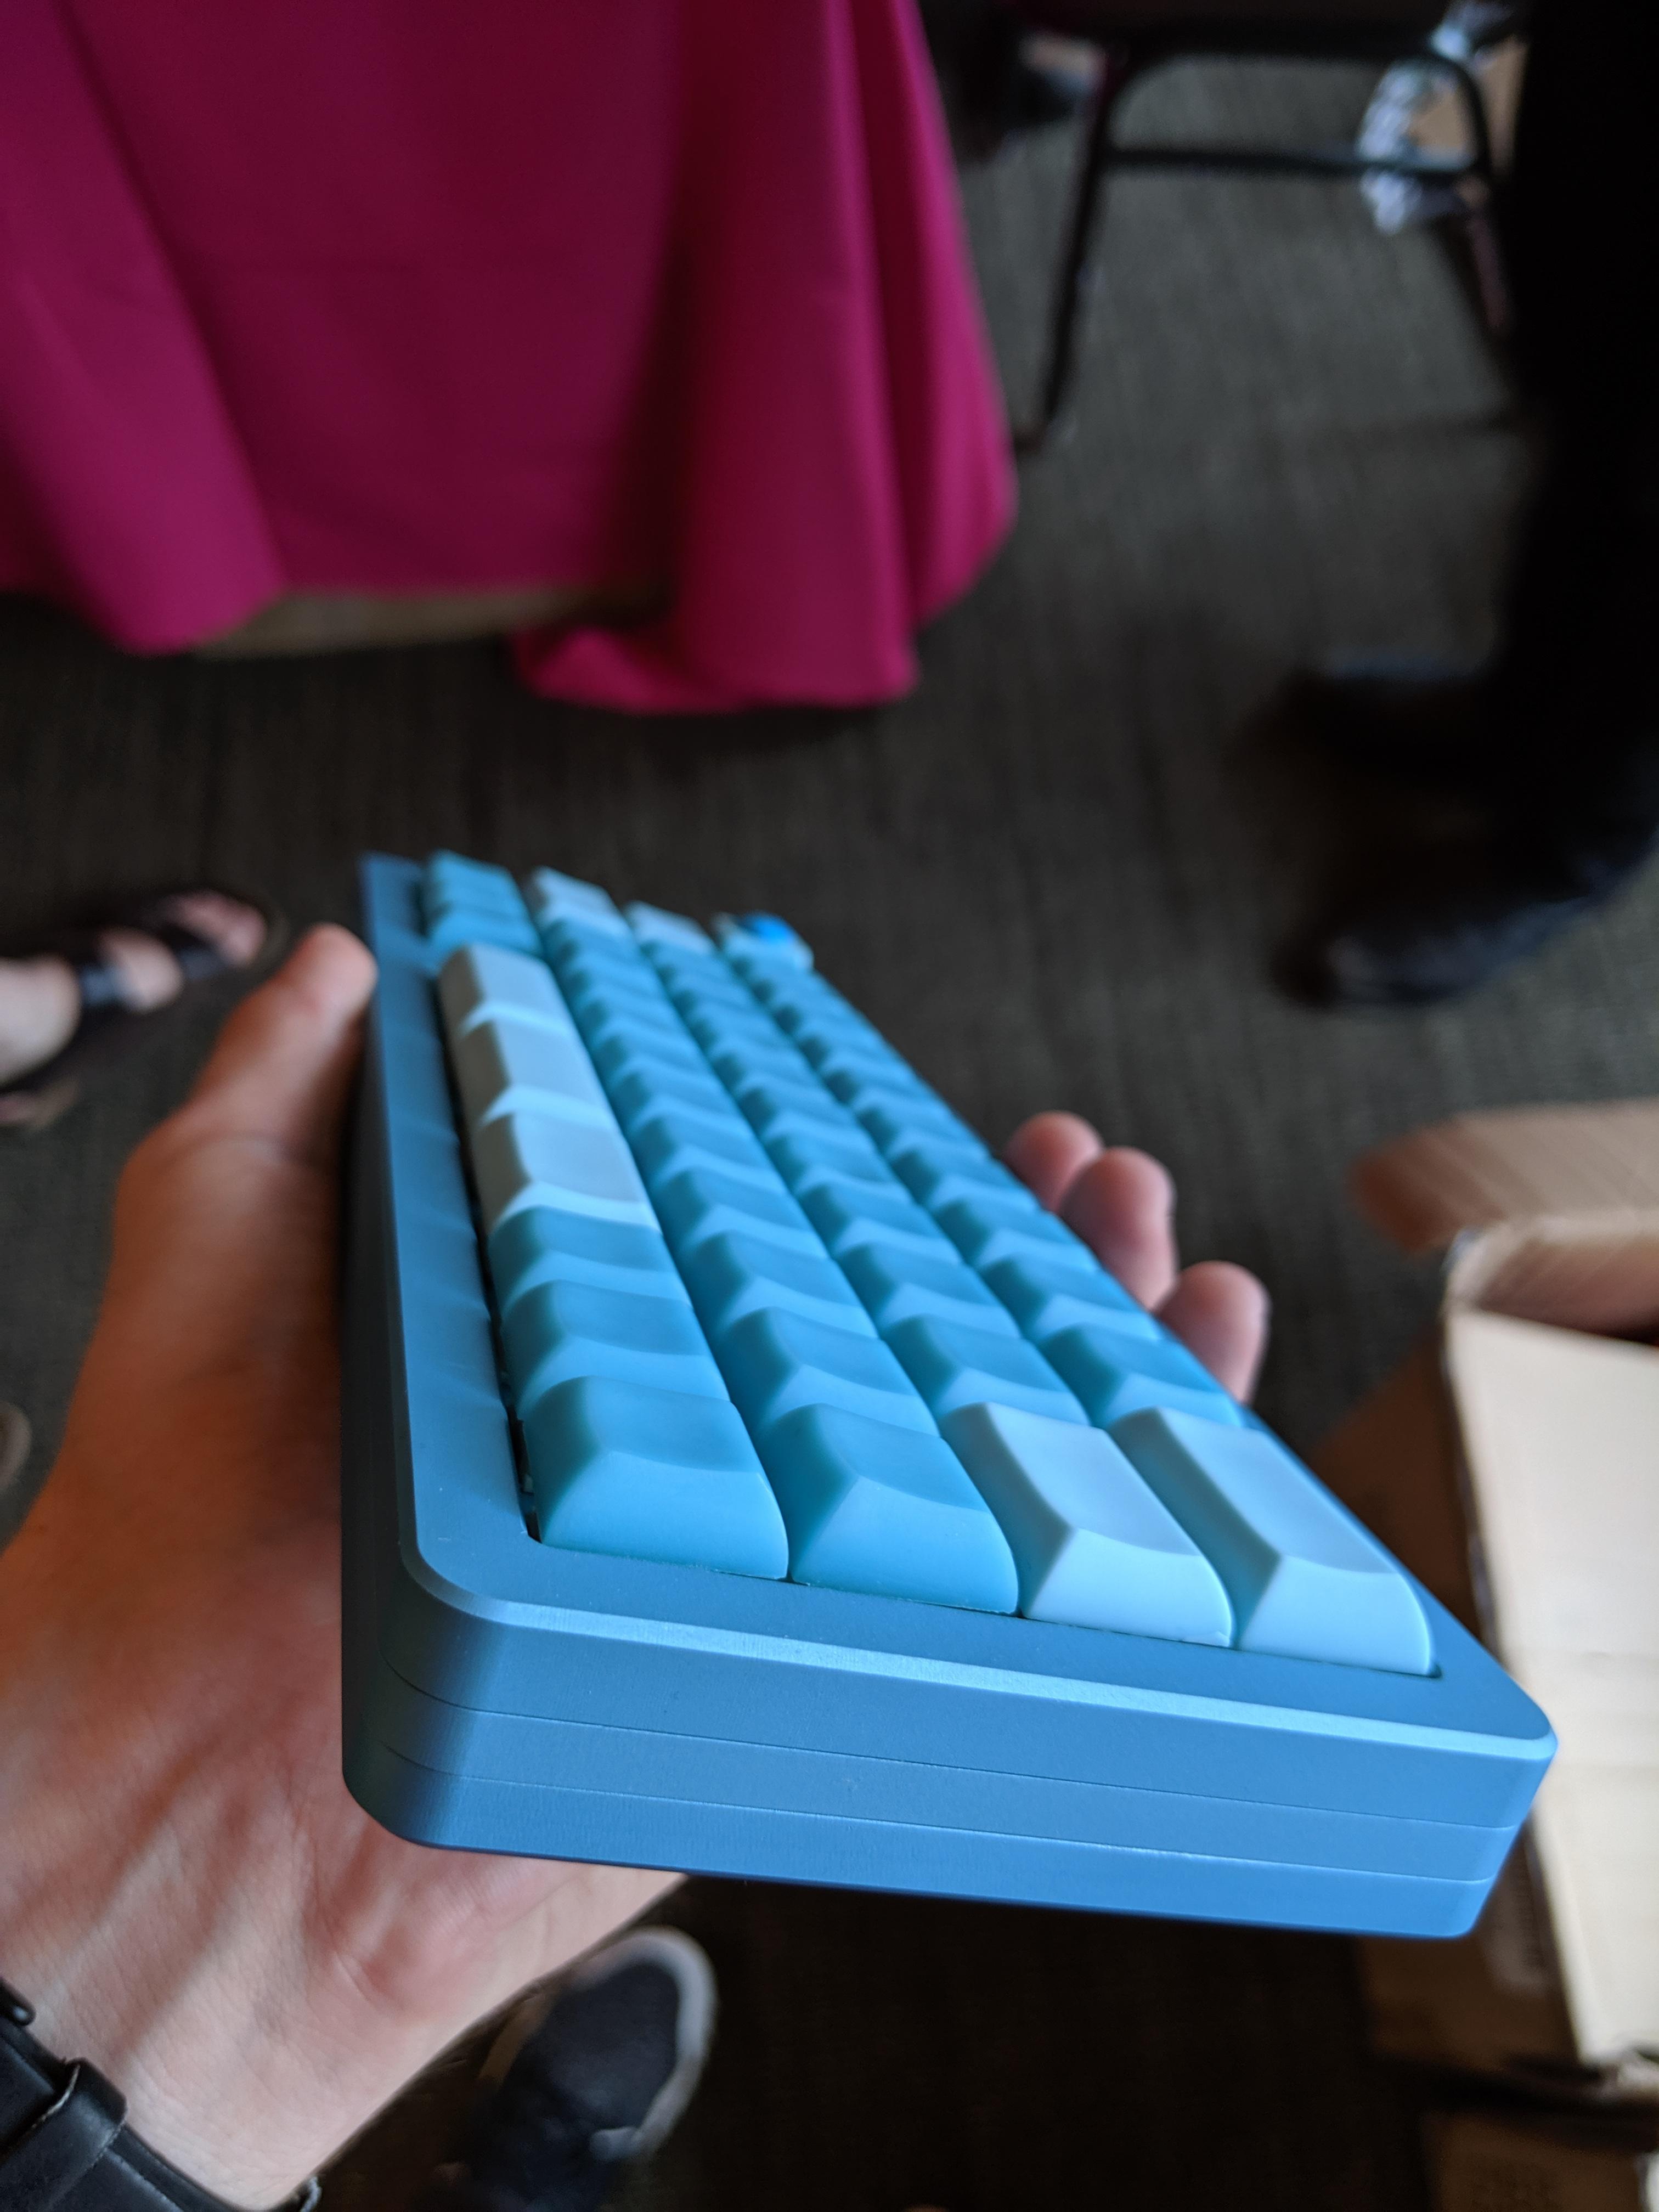 Blue resin HuB keycaps on an S-Type MHKB in Fabulous Teal